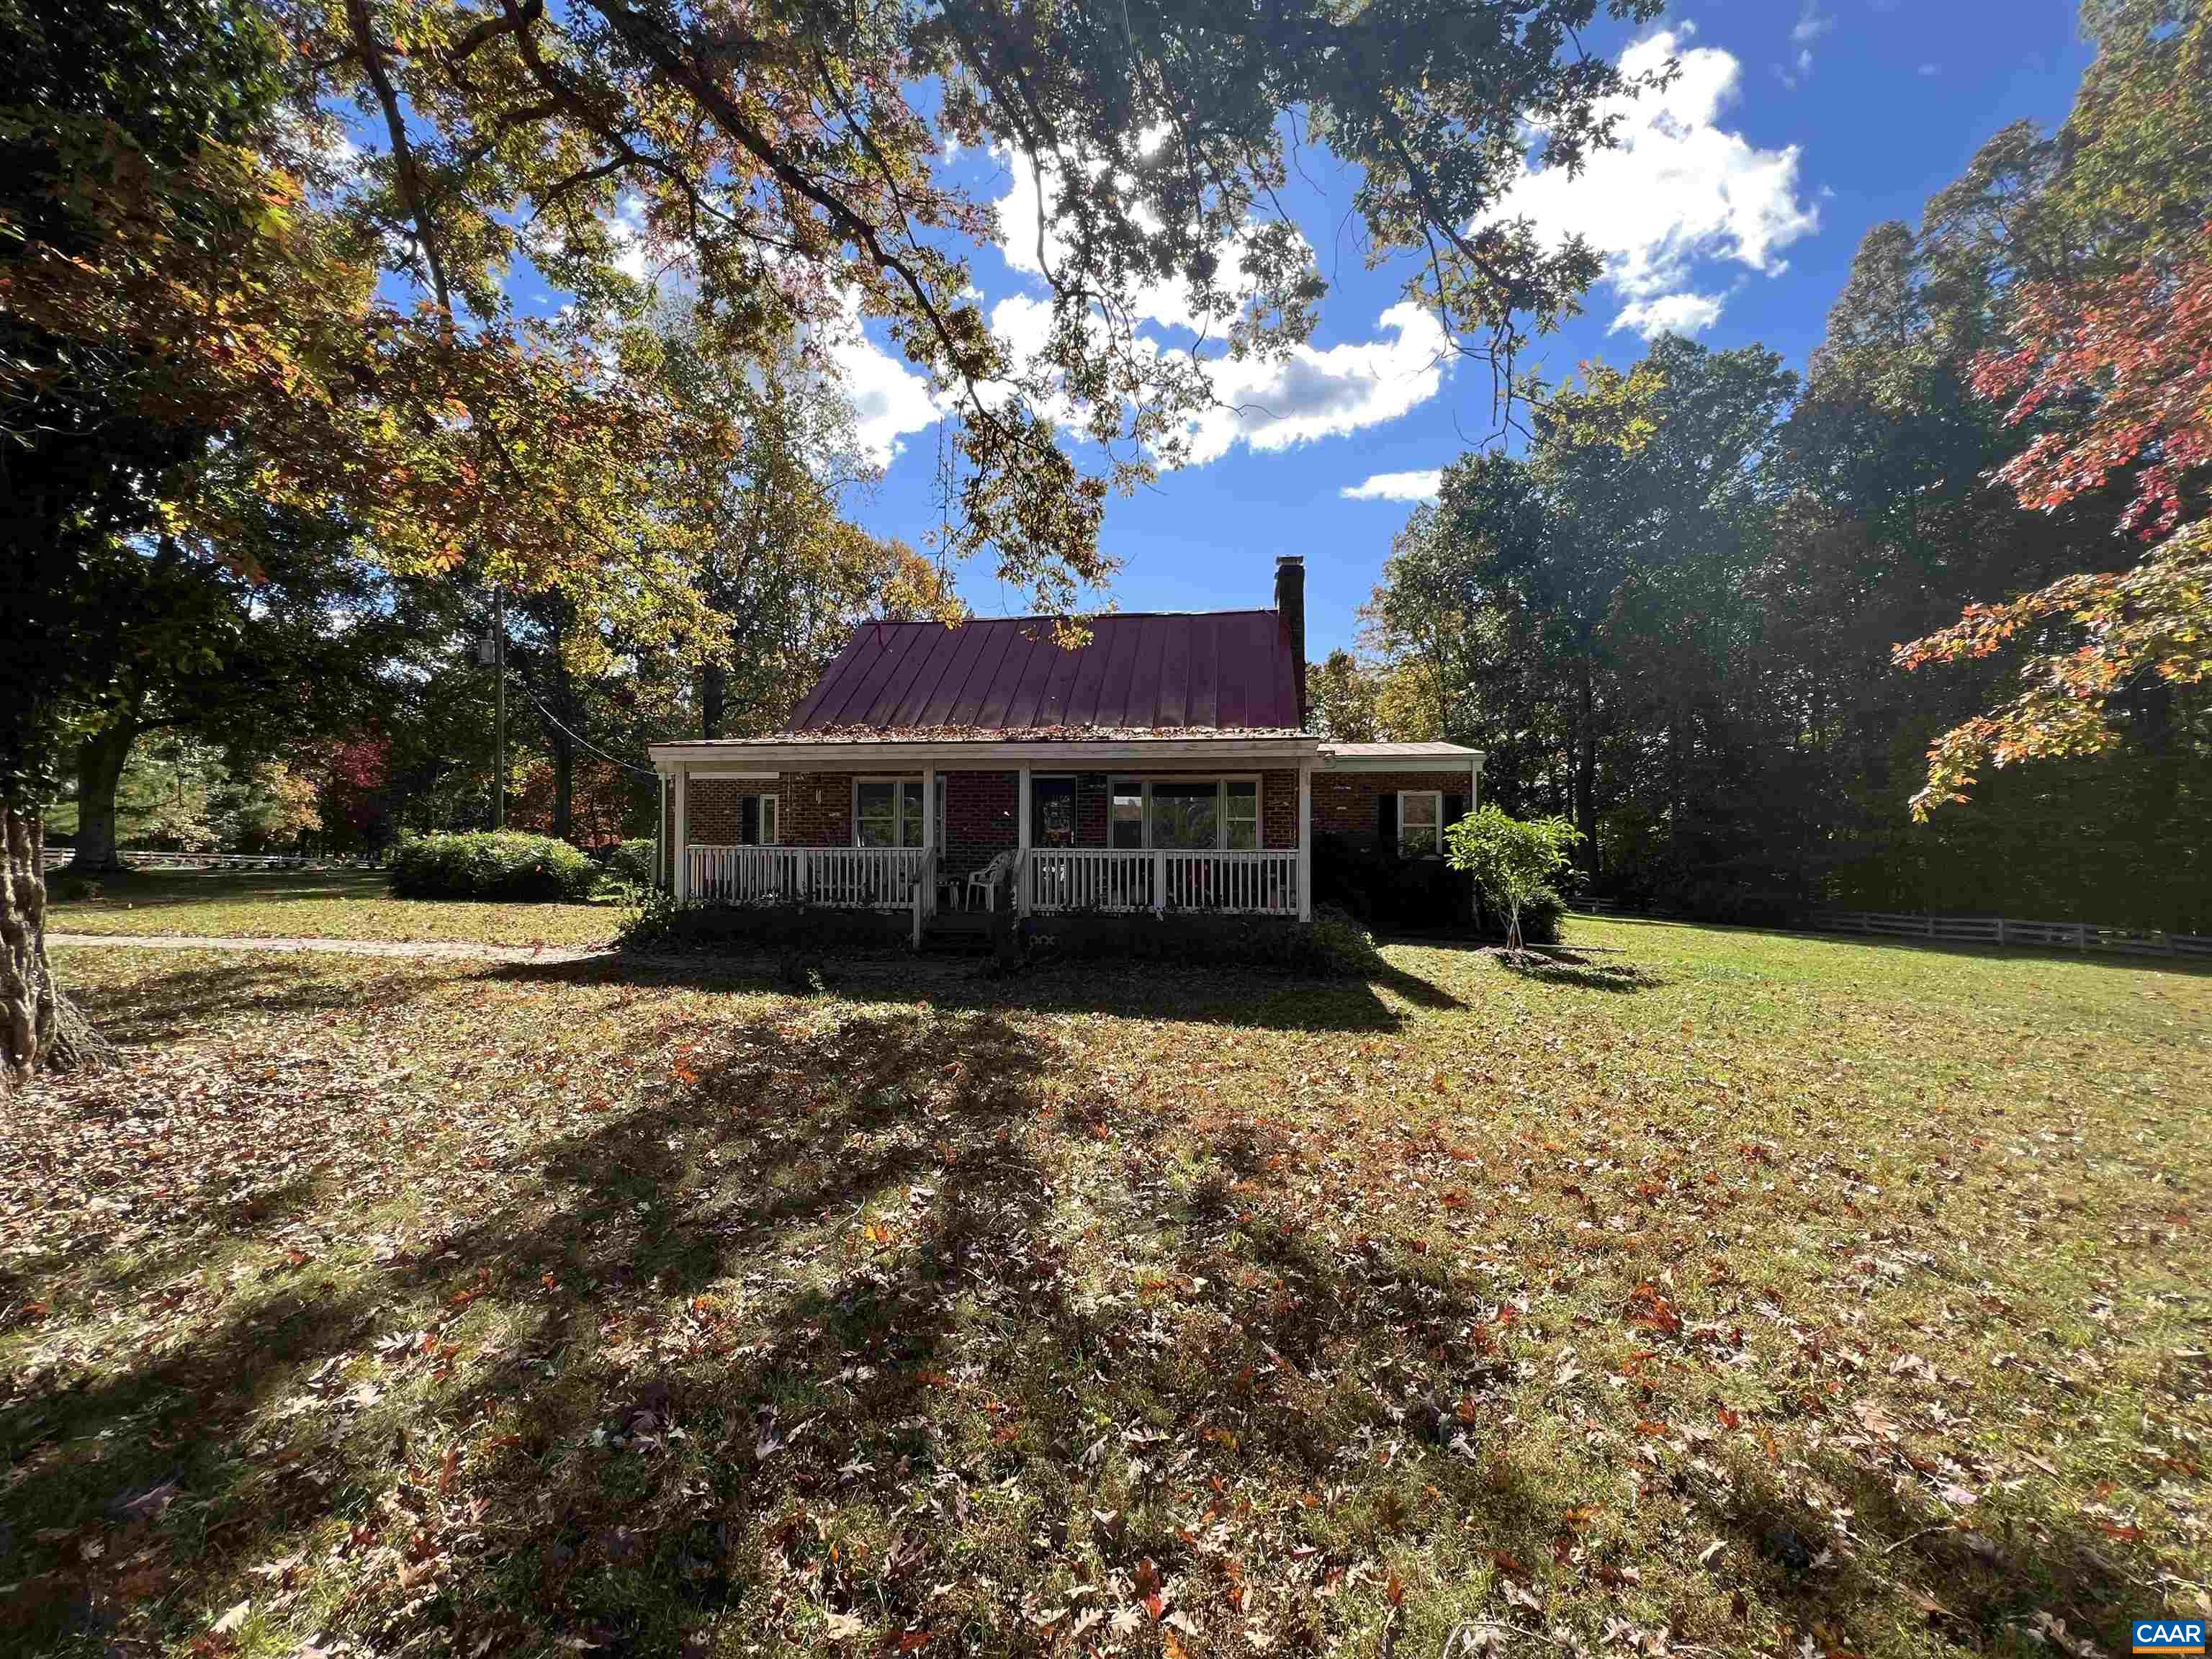 Lovely brick cottage w/ 2 1st level primary suites, chef's kitchen, fireplaces & prime Keswick location.   Originally a carriage house "Gale Hill" plantation.  Converted to a home around 1955.  Partially fenced w/ level landscaped yard.  Relax on the front or rear porches. 2nd level converted to a leased apartment. Make this house your home & enjoy life in Keswick Hunt Country minutes from Charlottesville, UVA, wineries, etc.  2nd level apartment leased.